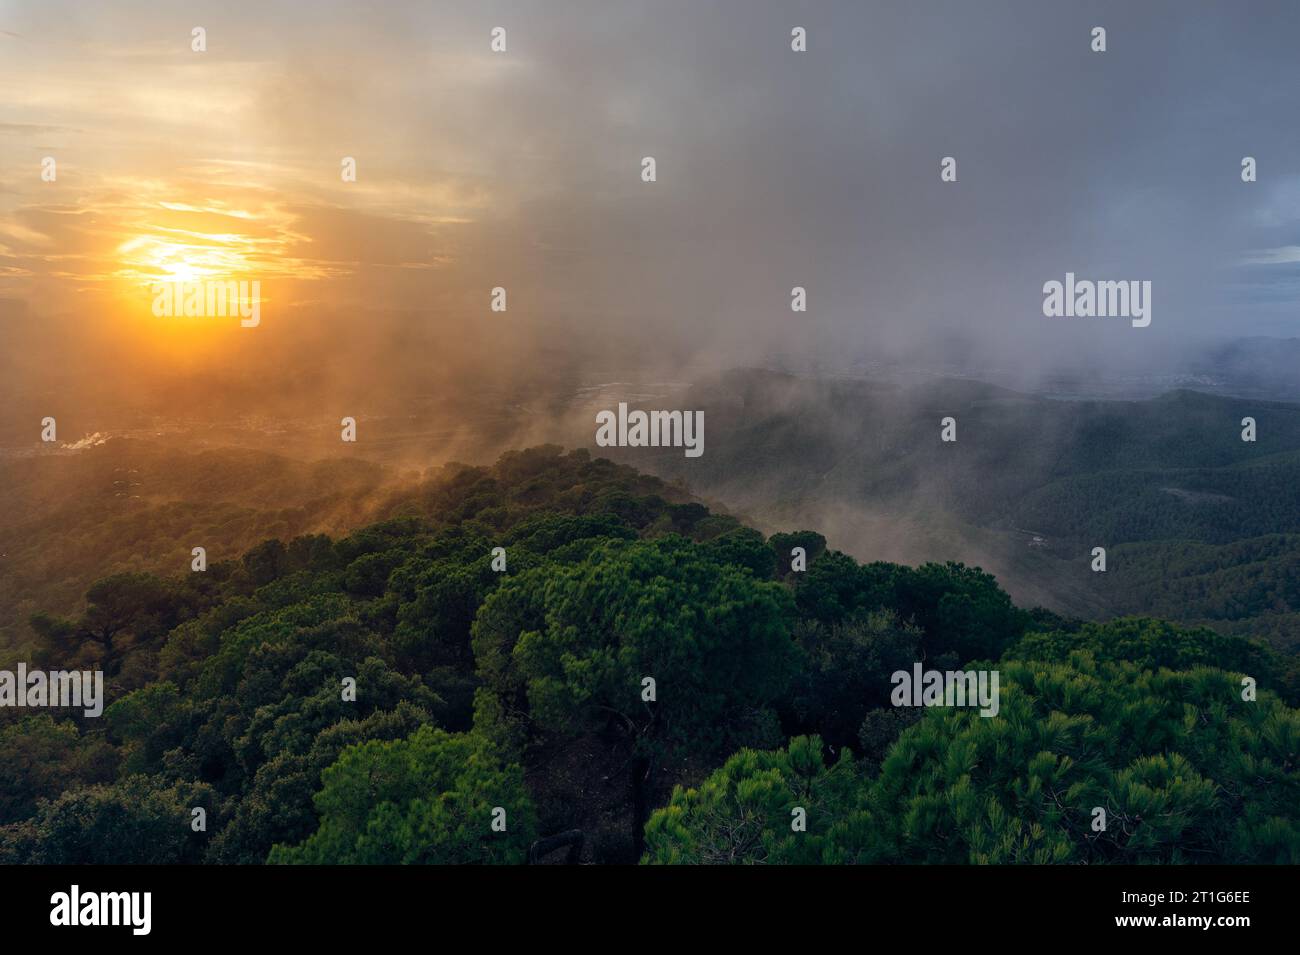 A sunset over the hills and misty forest Stock Photo